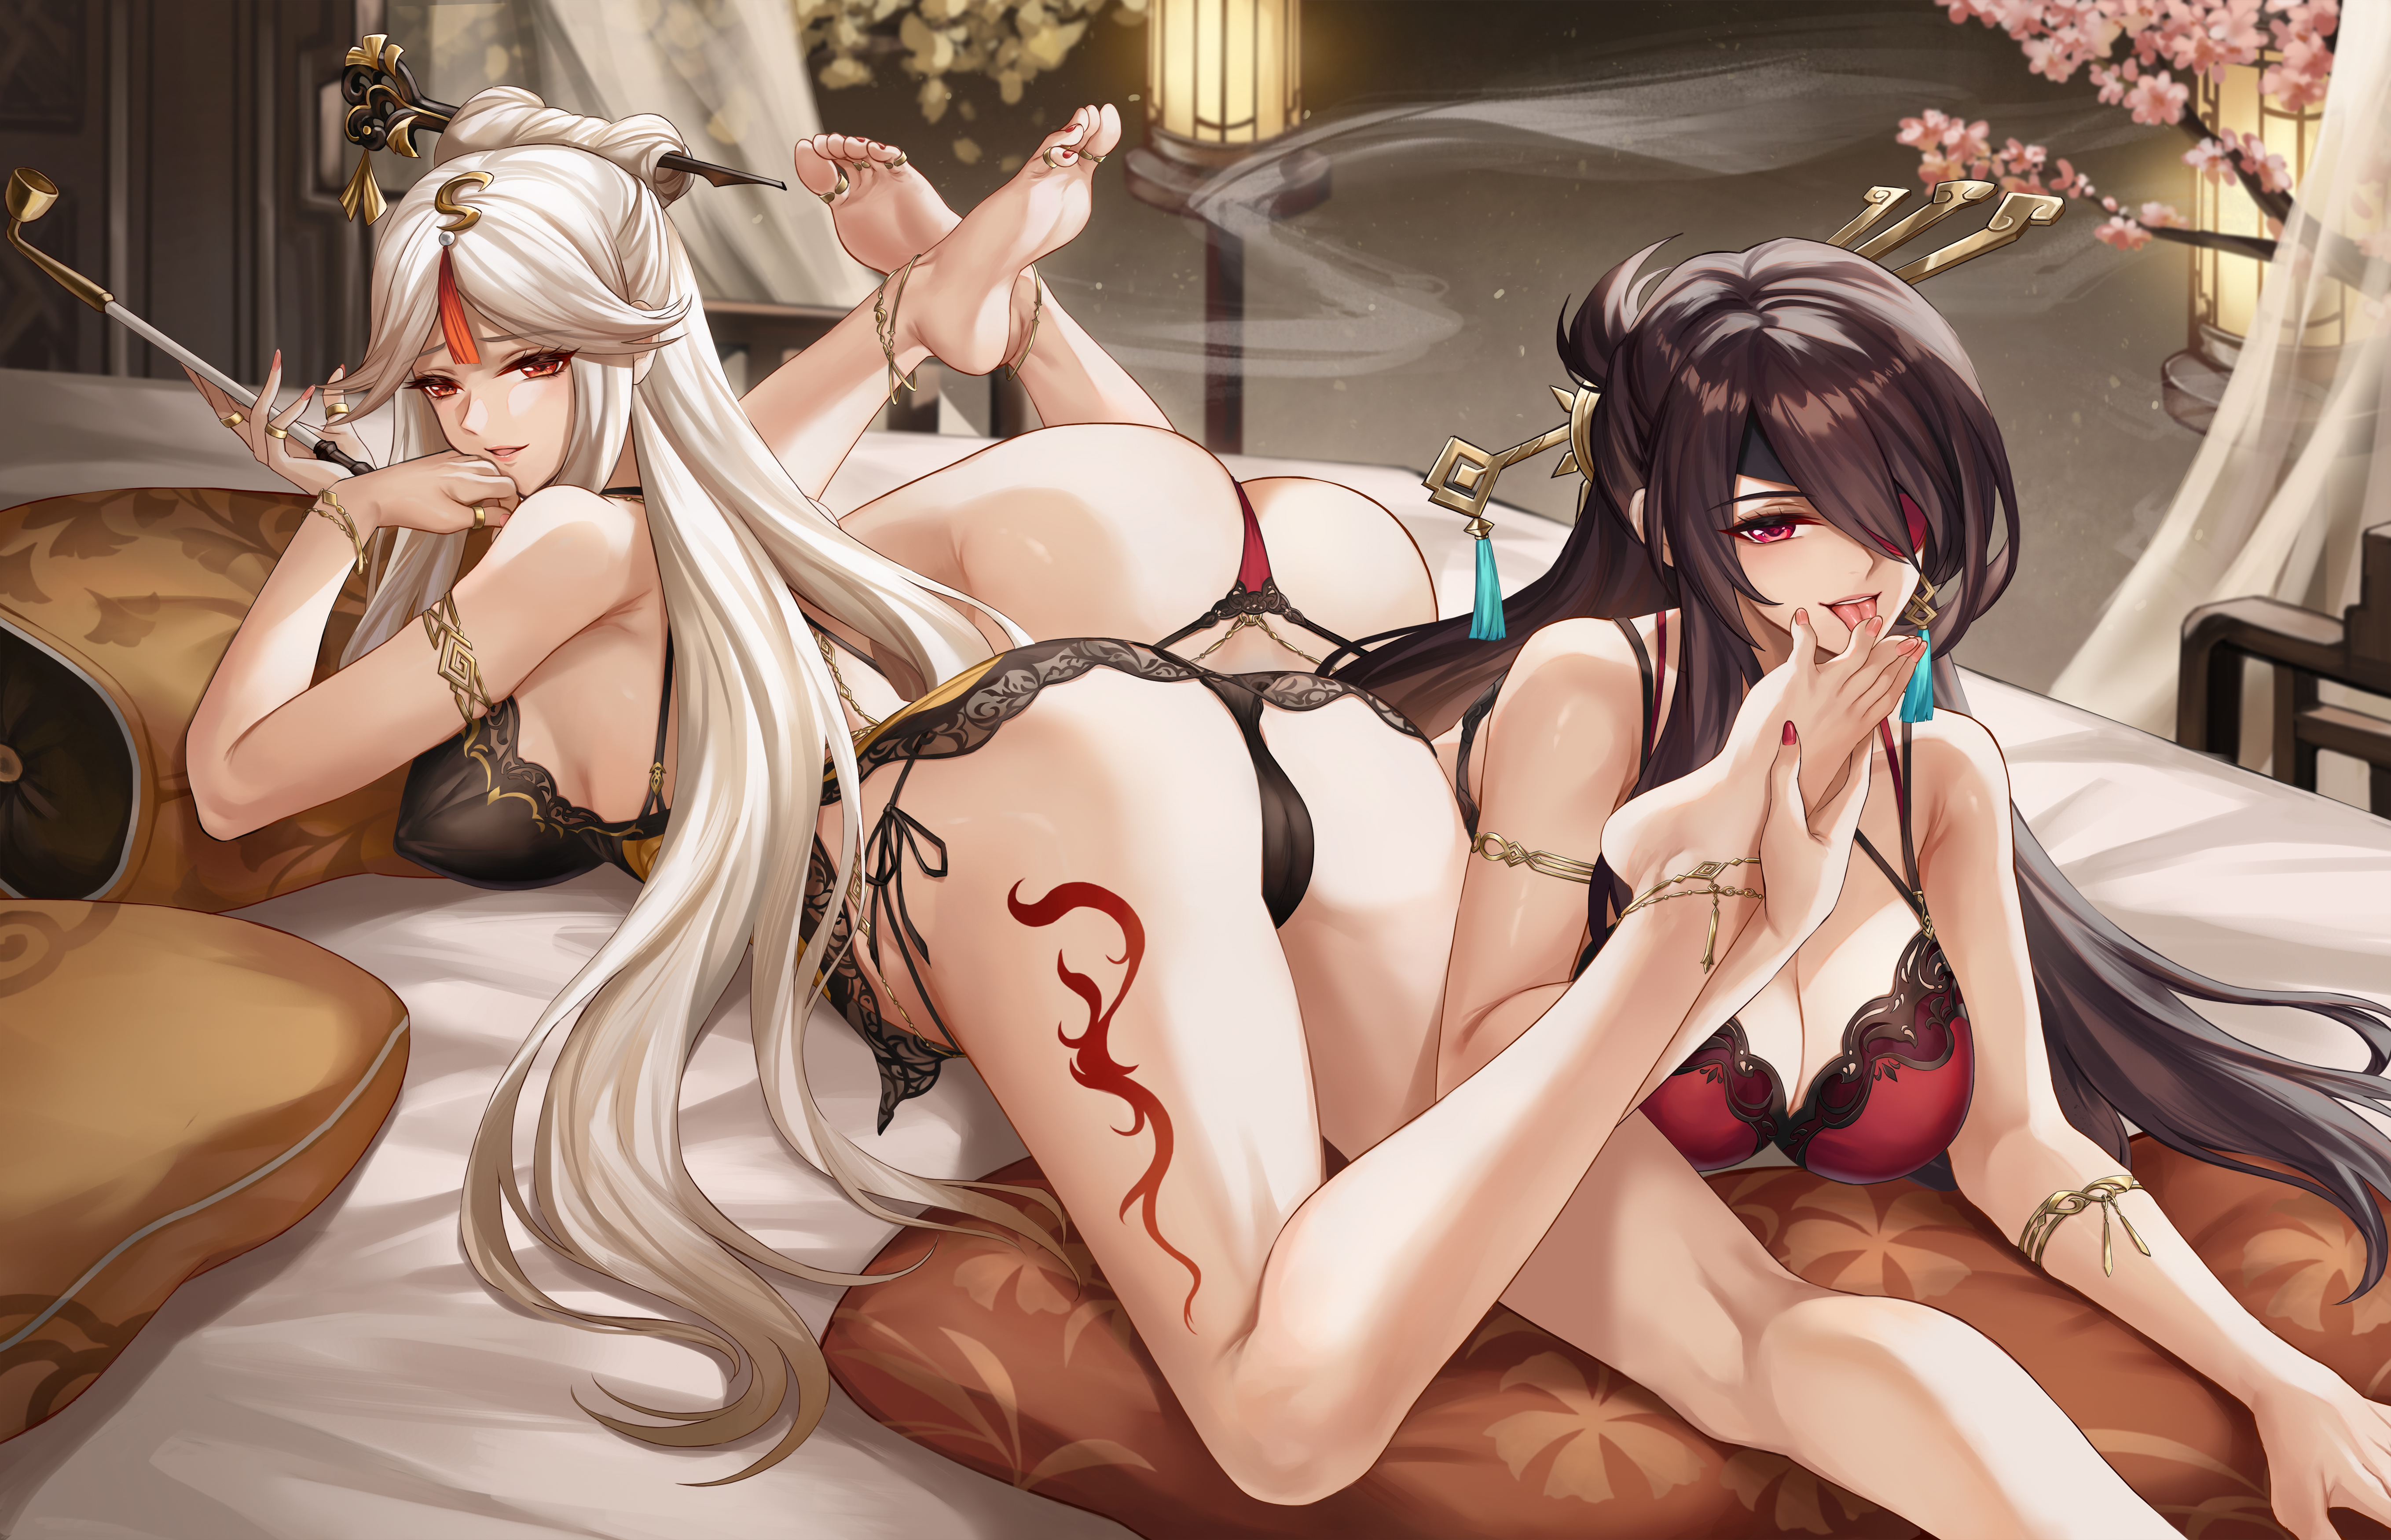 Anime 5434x3500 anime anime girls rear view smiling ass curvy yuri Genshin Impact tattoo Chinese fan art feet feet in face legs up licking feet foot sole Kacyu looking at viewer looking over shoulder bed looking back tongues licking smoke toes lying down lying on front long hair pillow in bed big boobs cleavage cameltoe foot fetishism bracelets underwear anklet feet in the air pipes Beidou (Genshin Impact) Ningguang (Genshin Impact)